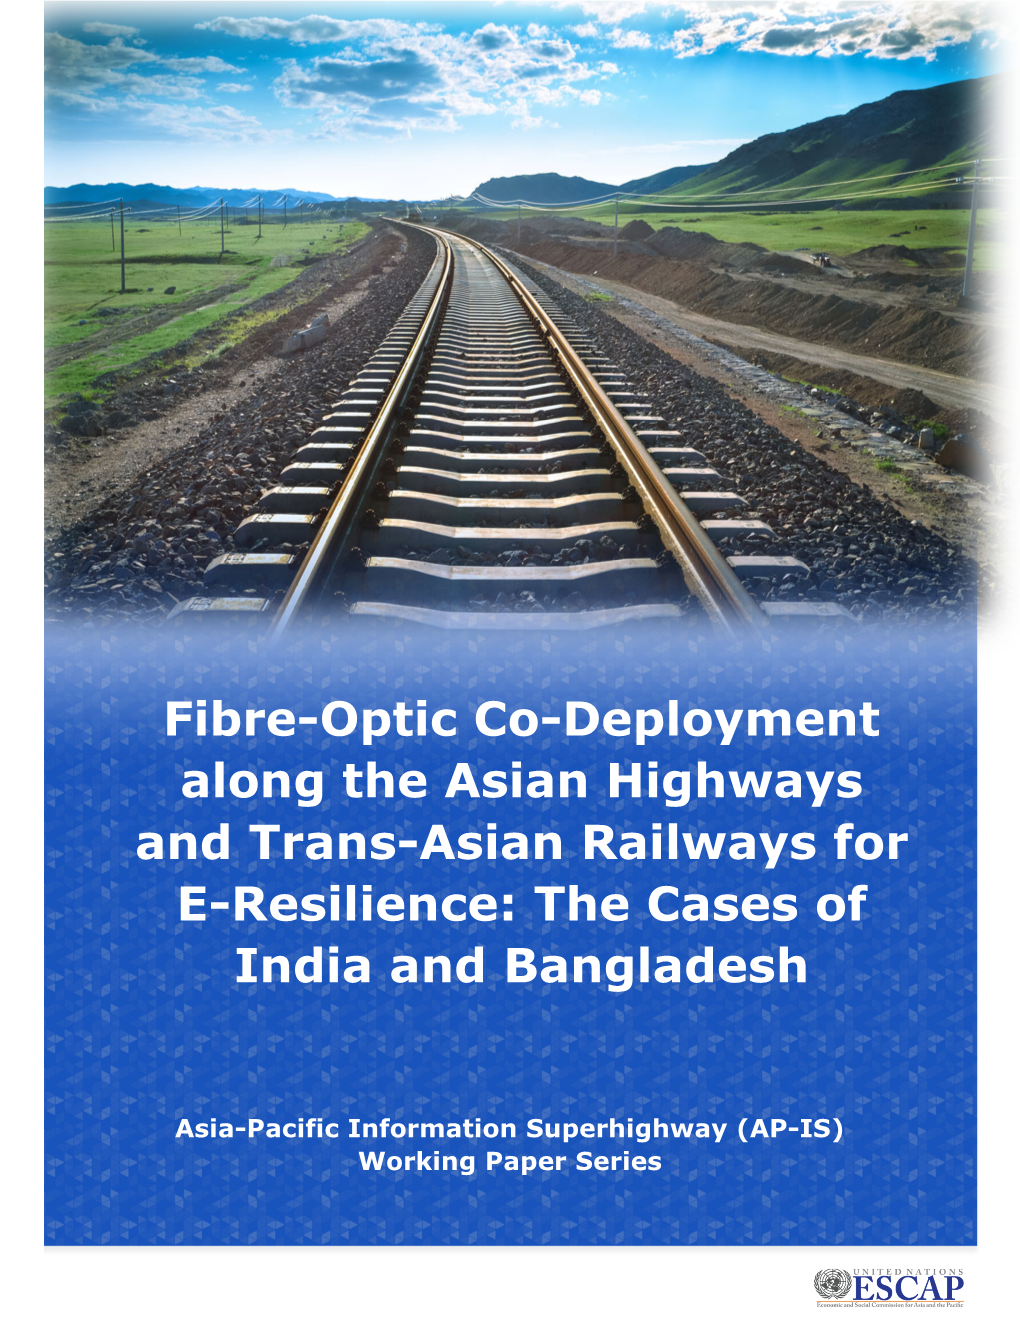 Fibre-Optic Co-Deployment Along the Asian Highways and Trans-Asian